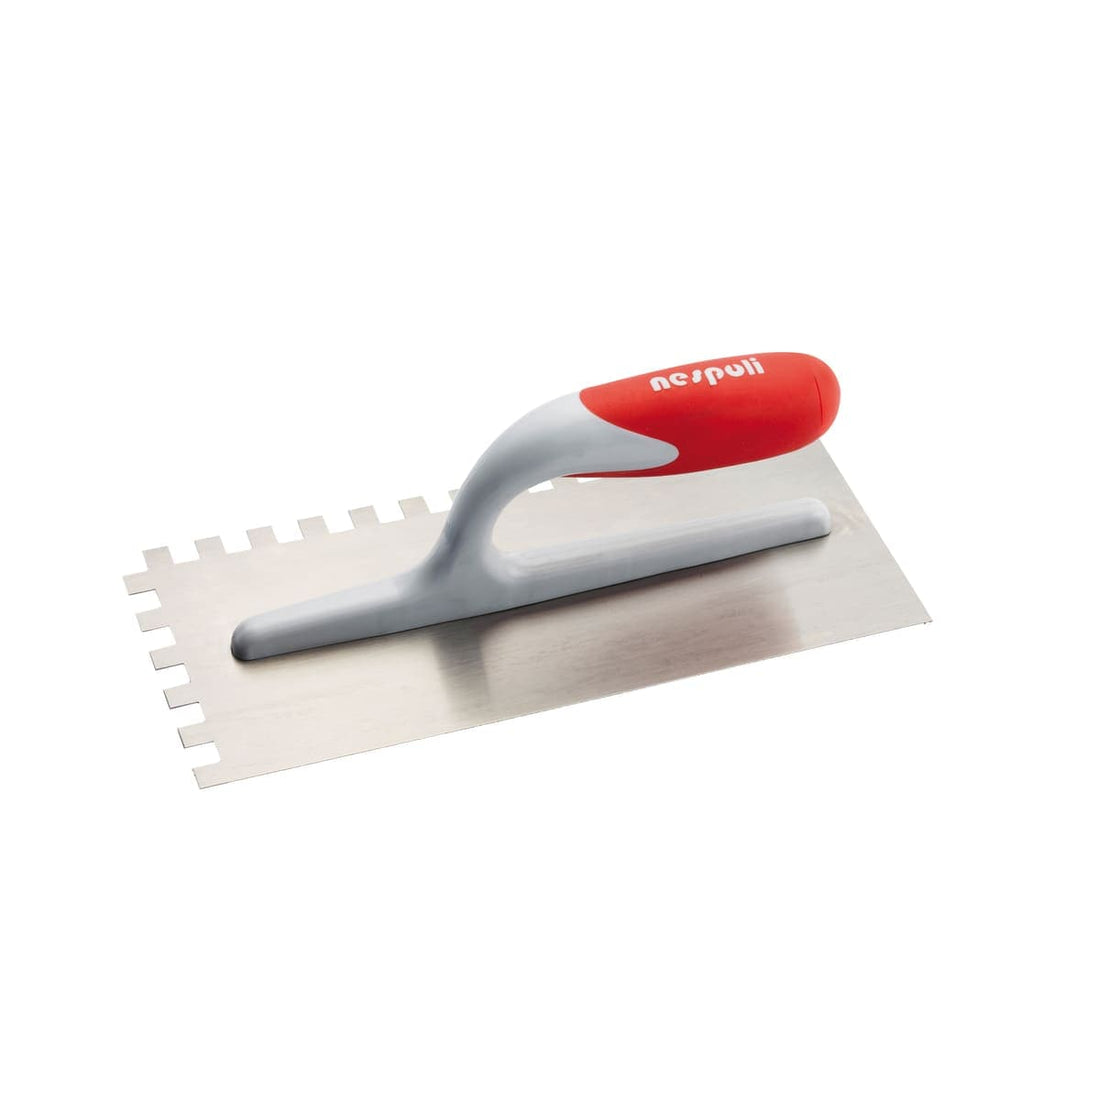 USA AIR TOUCH STEEL TROWEL POLYPROPYLENE HANDLE, TOOTHING 8MM, SIZE 12X28CM - best price from Maltashopper.com BR400920012